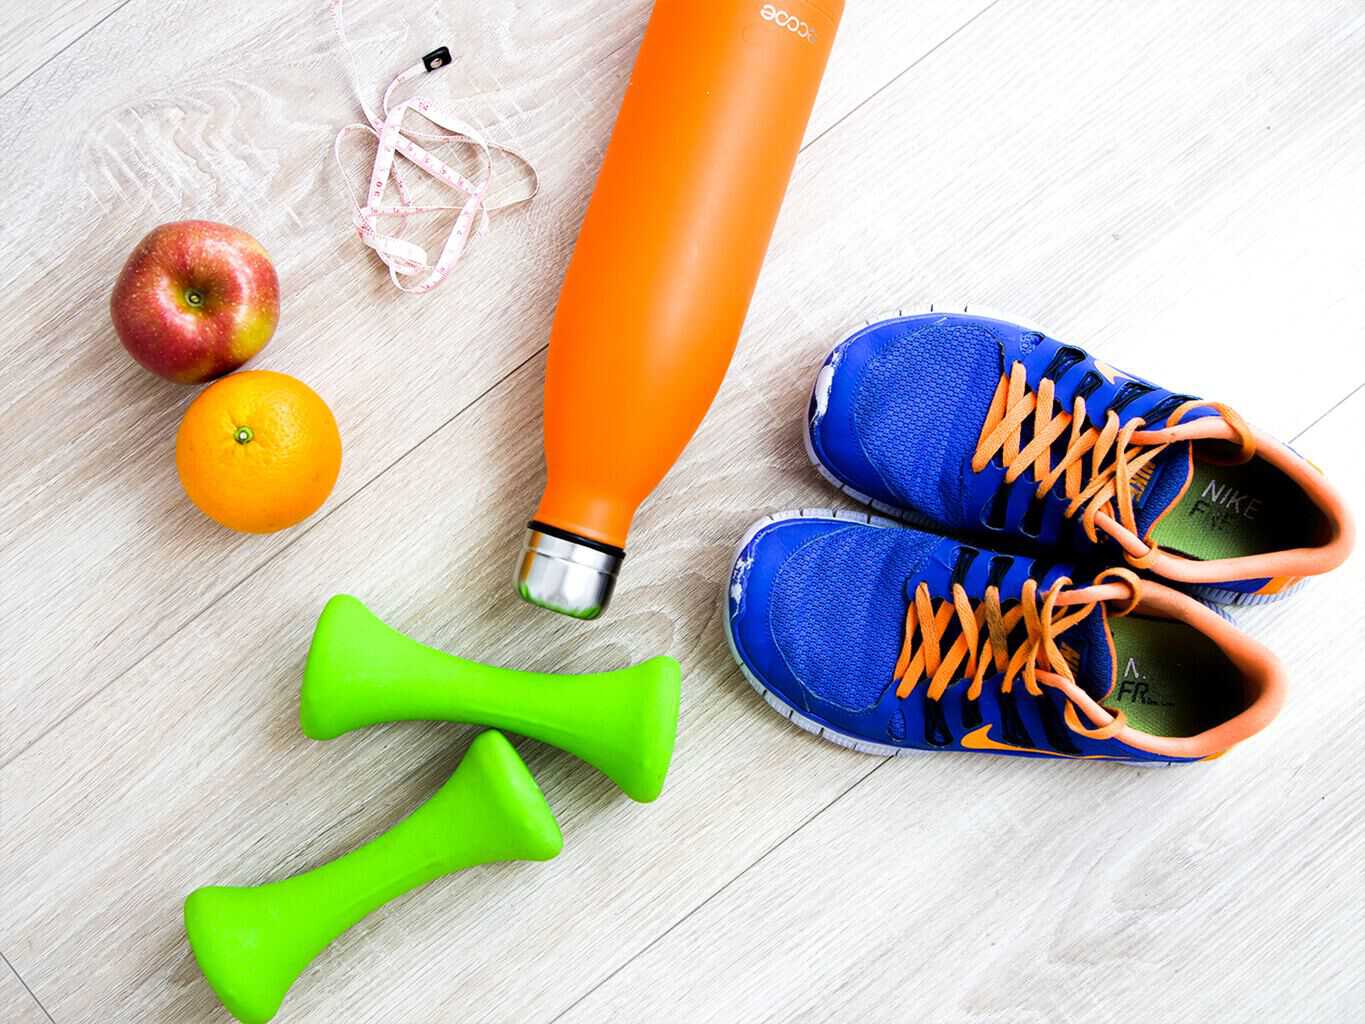 things that you need for diet and exercise; sneakers, dumbells, apples, and a bottle of juice